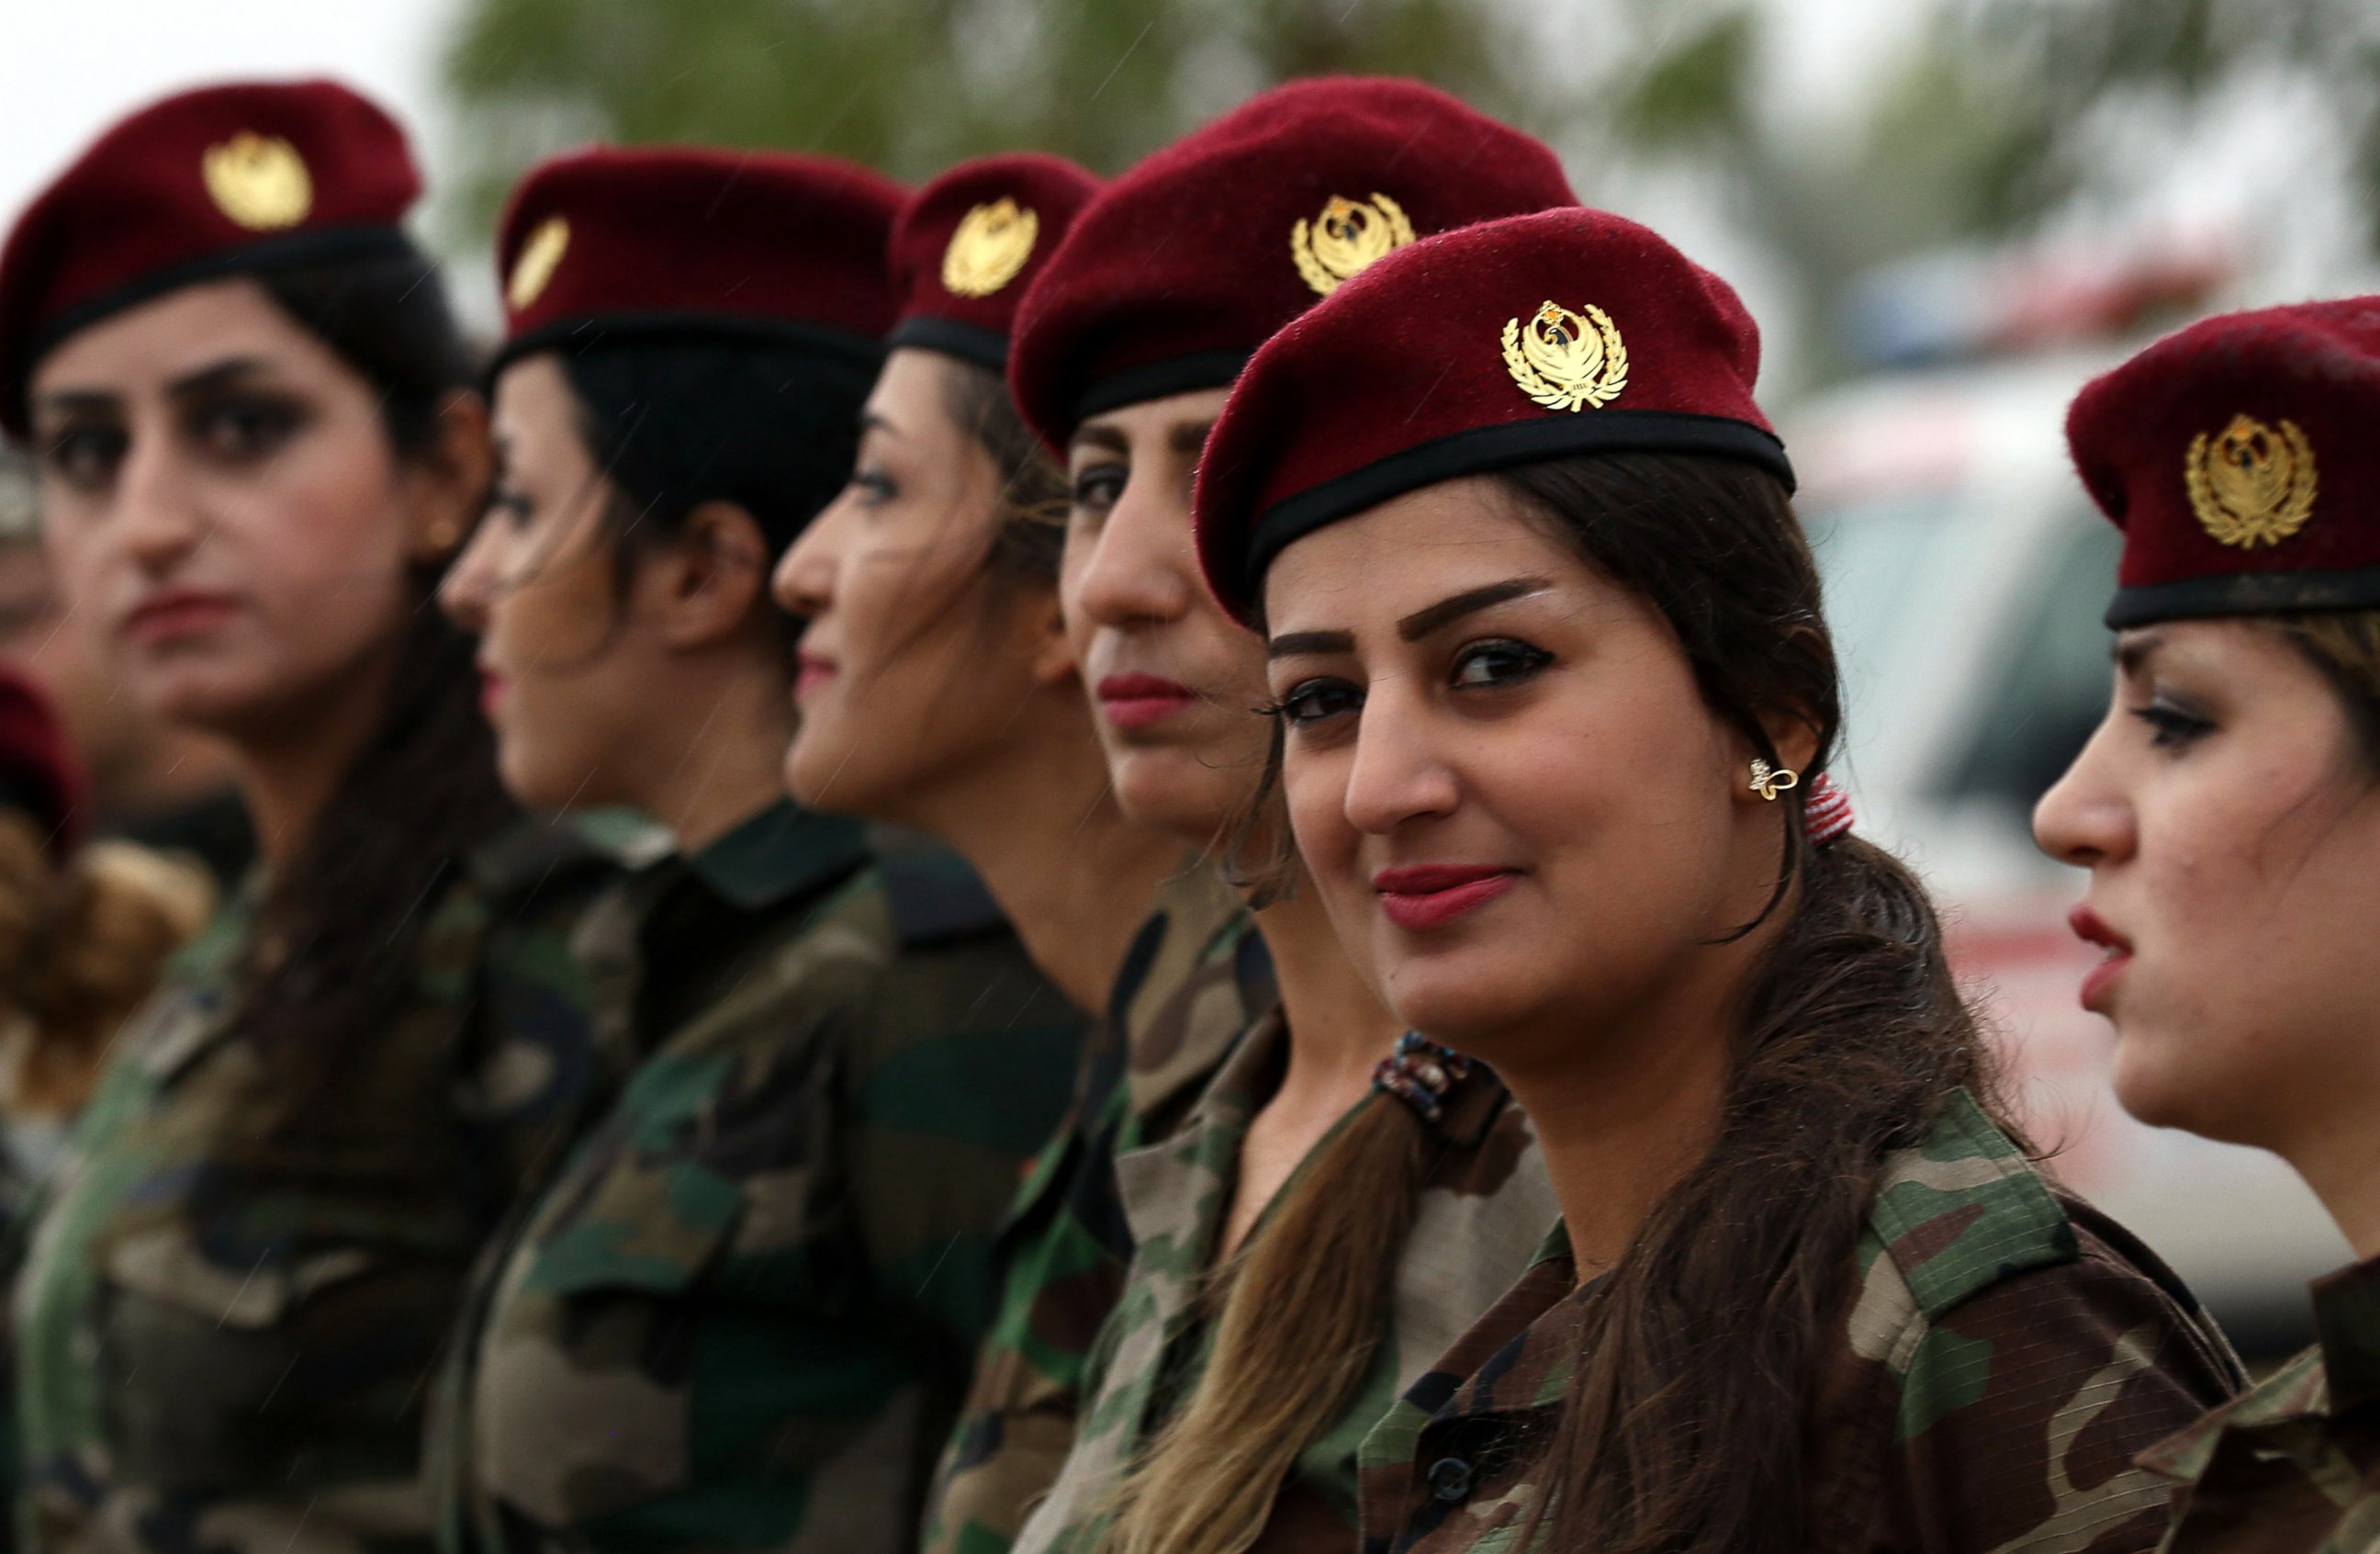 PHOTO:Kurdish Peshmerga female fighters march during a training camp conducted by trainers from the German military forces in Arbil, the capital of the Kurdish autonomous region in northern Iraq, Oct. 27, 2015.  